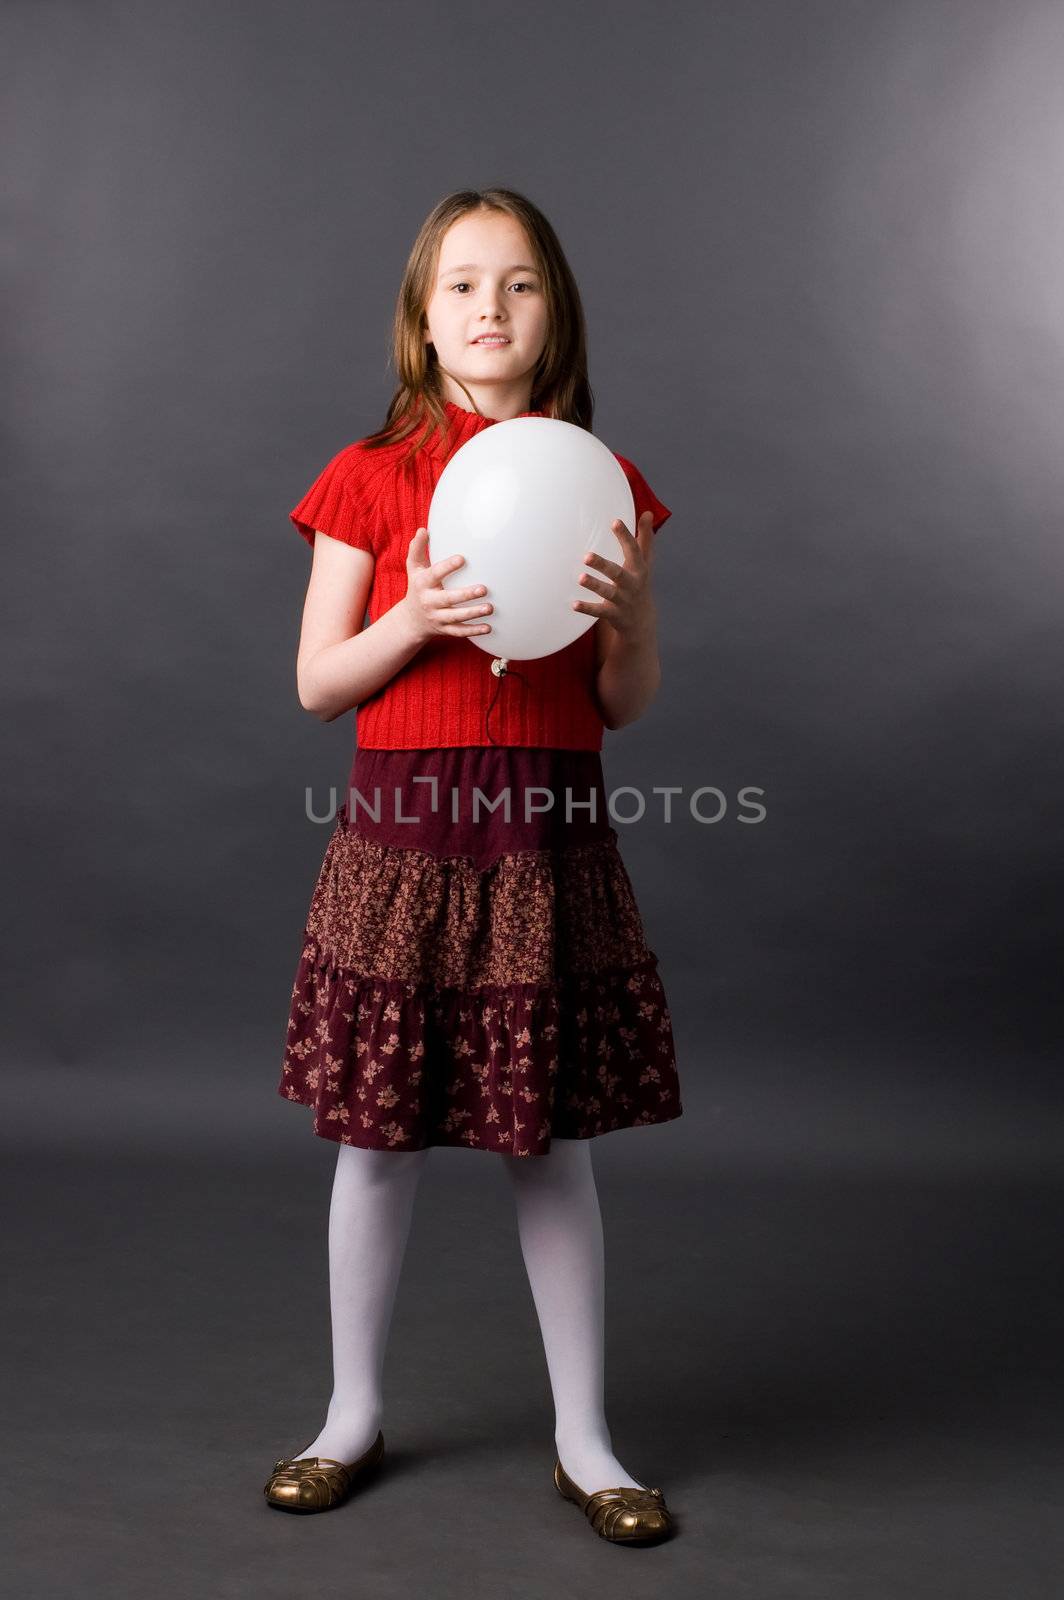 The girl with a balloon by andyphoto